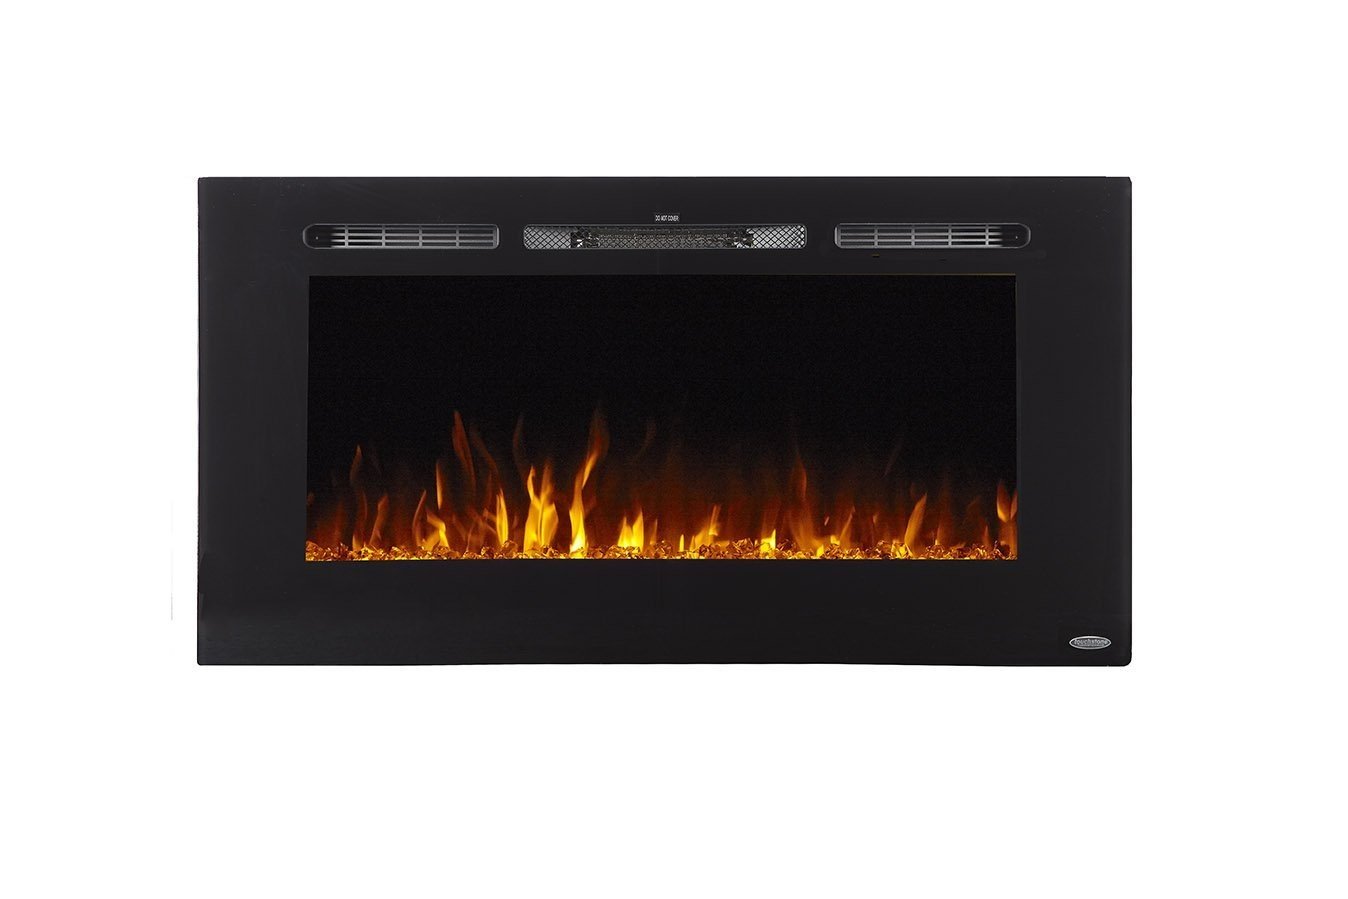 Touchstone Sideline 40 80027 40" Recessed Electric Fireplace